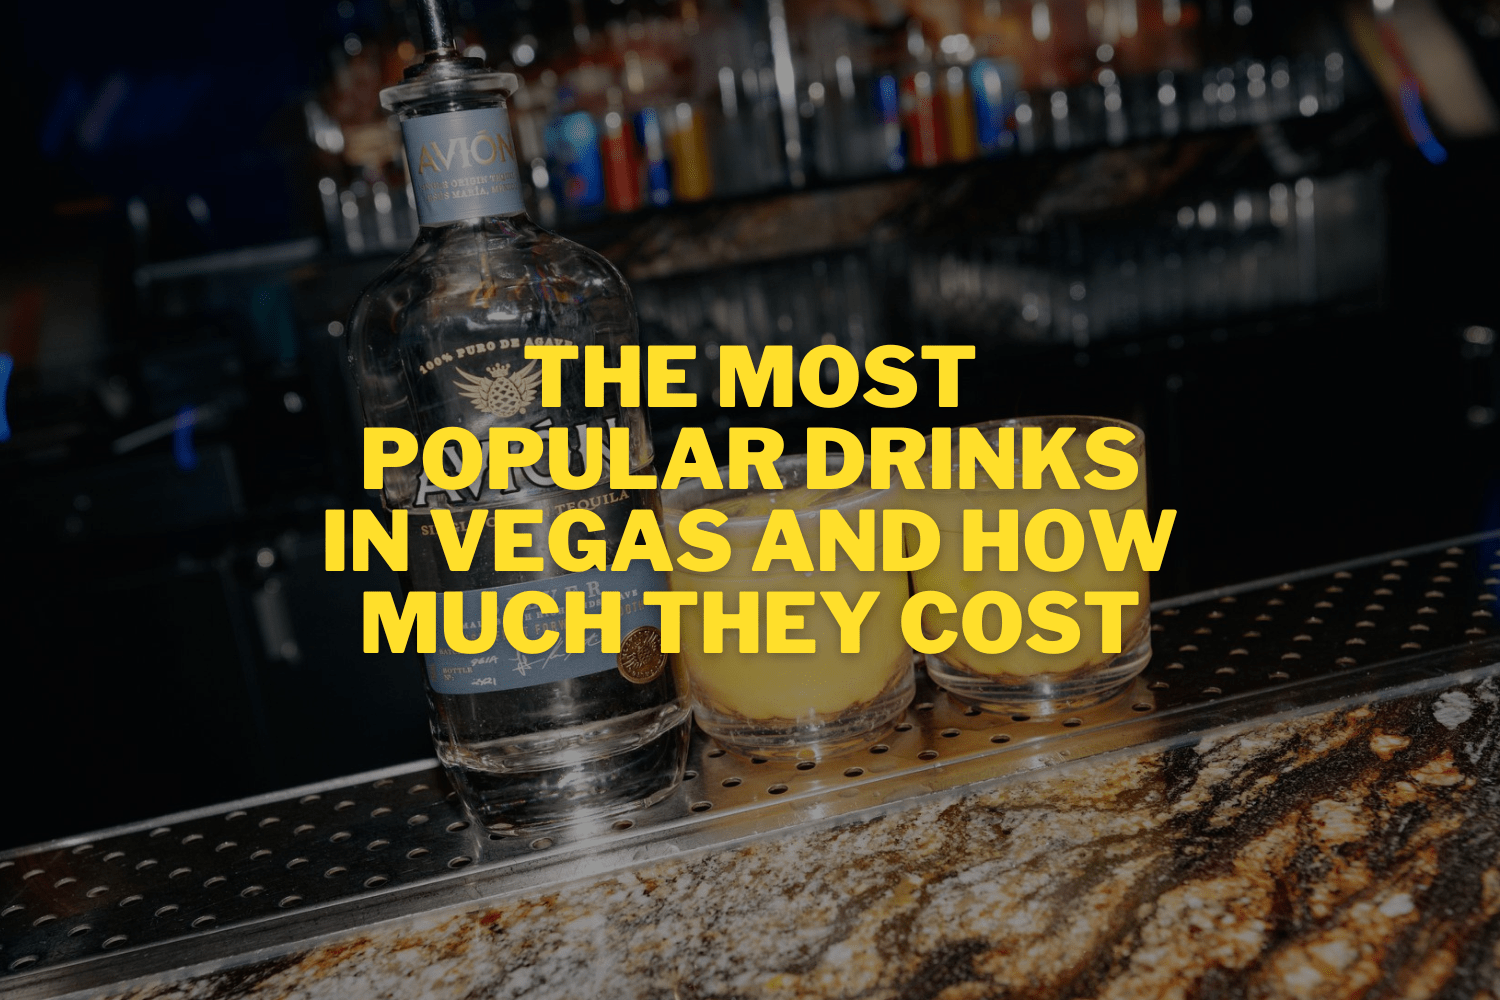 Bars' coolest drink containers